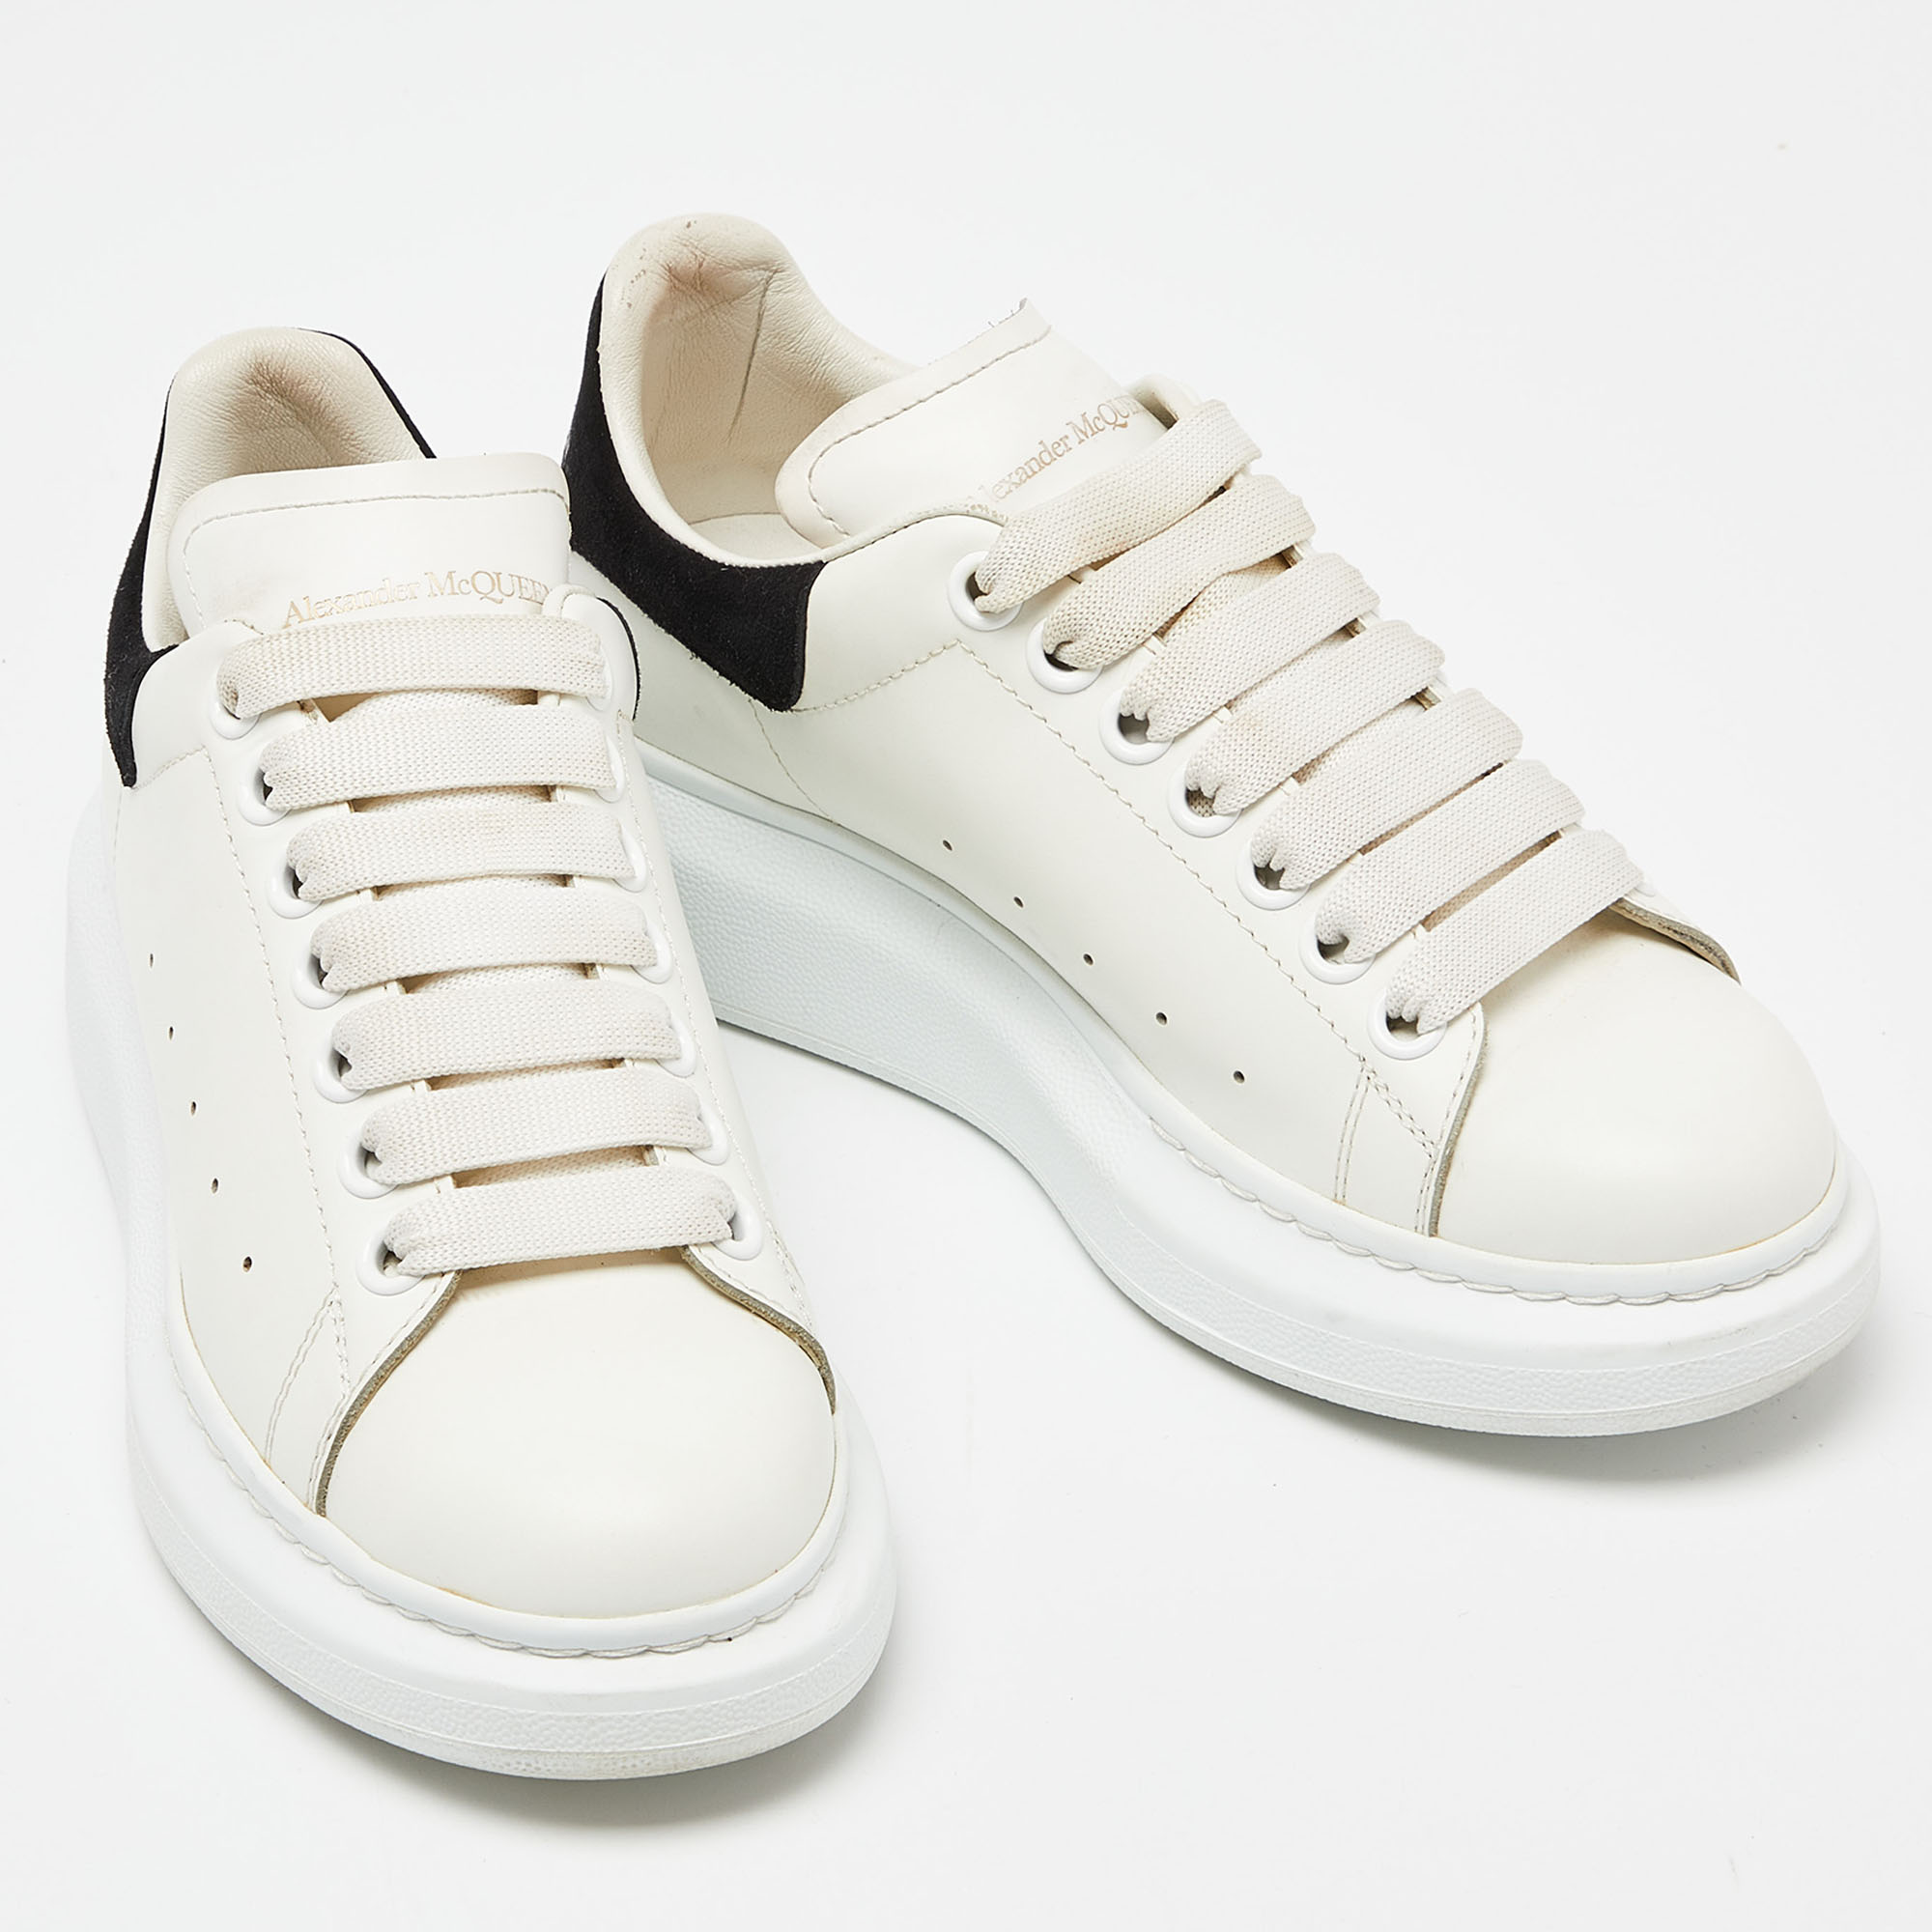 Alexander McQueen White/Black Leather And Suede Oversized Low Top Sneakers Size 36